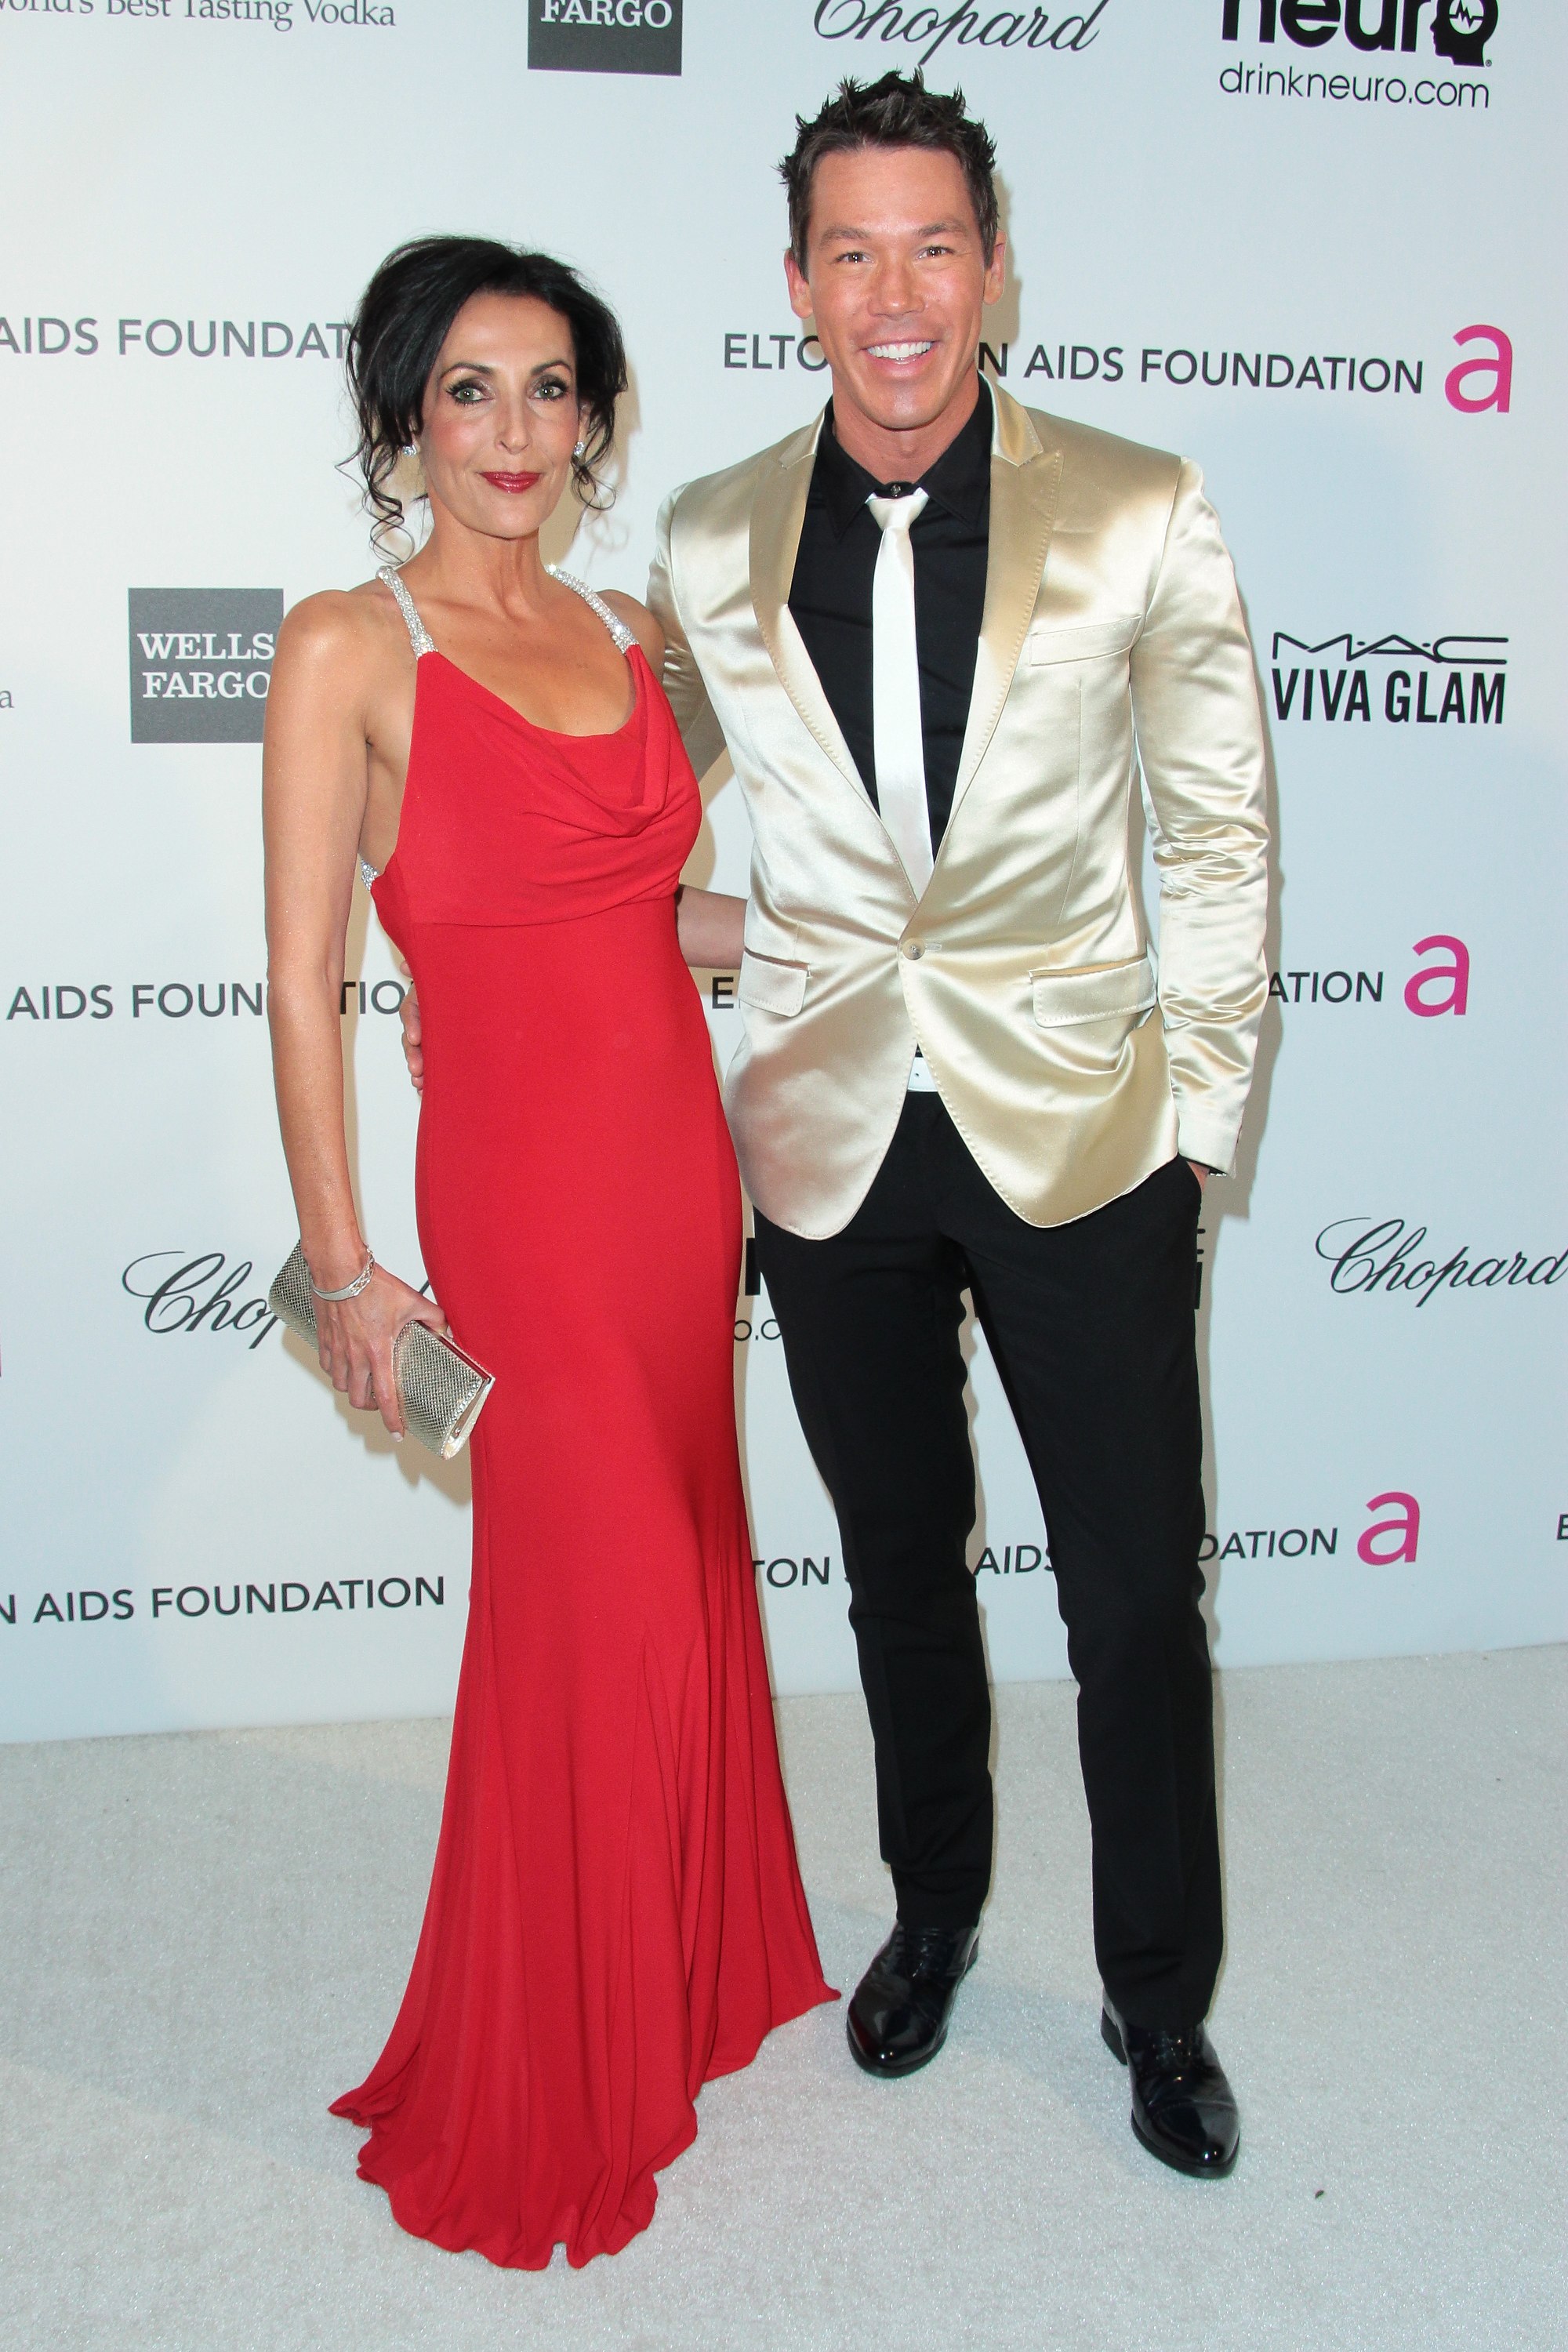 Ghada Dergham and David Bromstad arrive at the Elton John AIDS Foundation Academy Awards Viewing Party